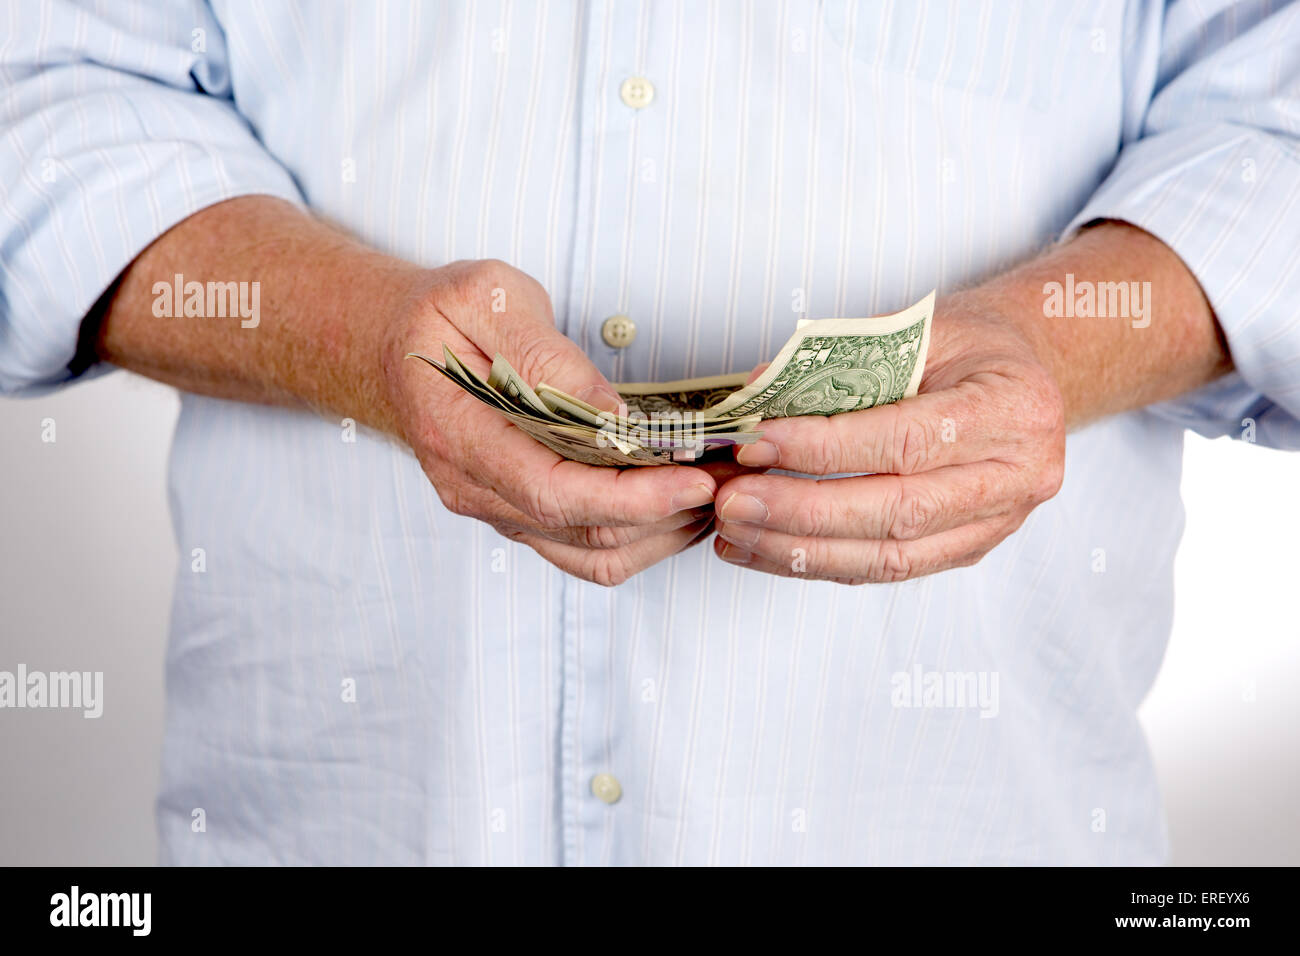 Mature man counts his cash money which are US dollar bills. Stock Photo